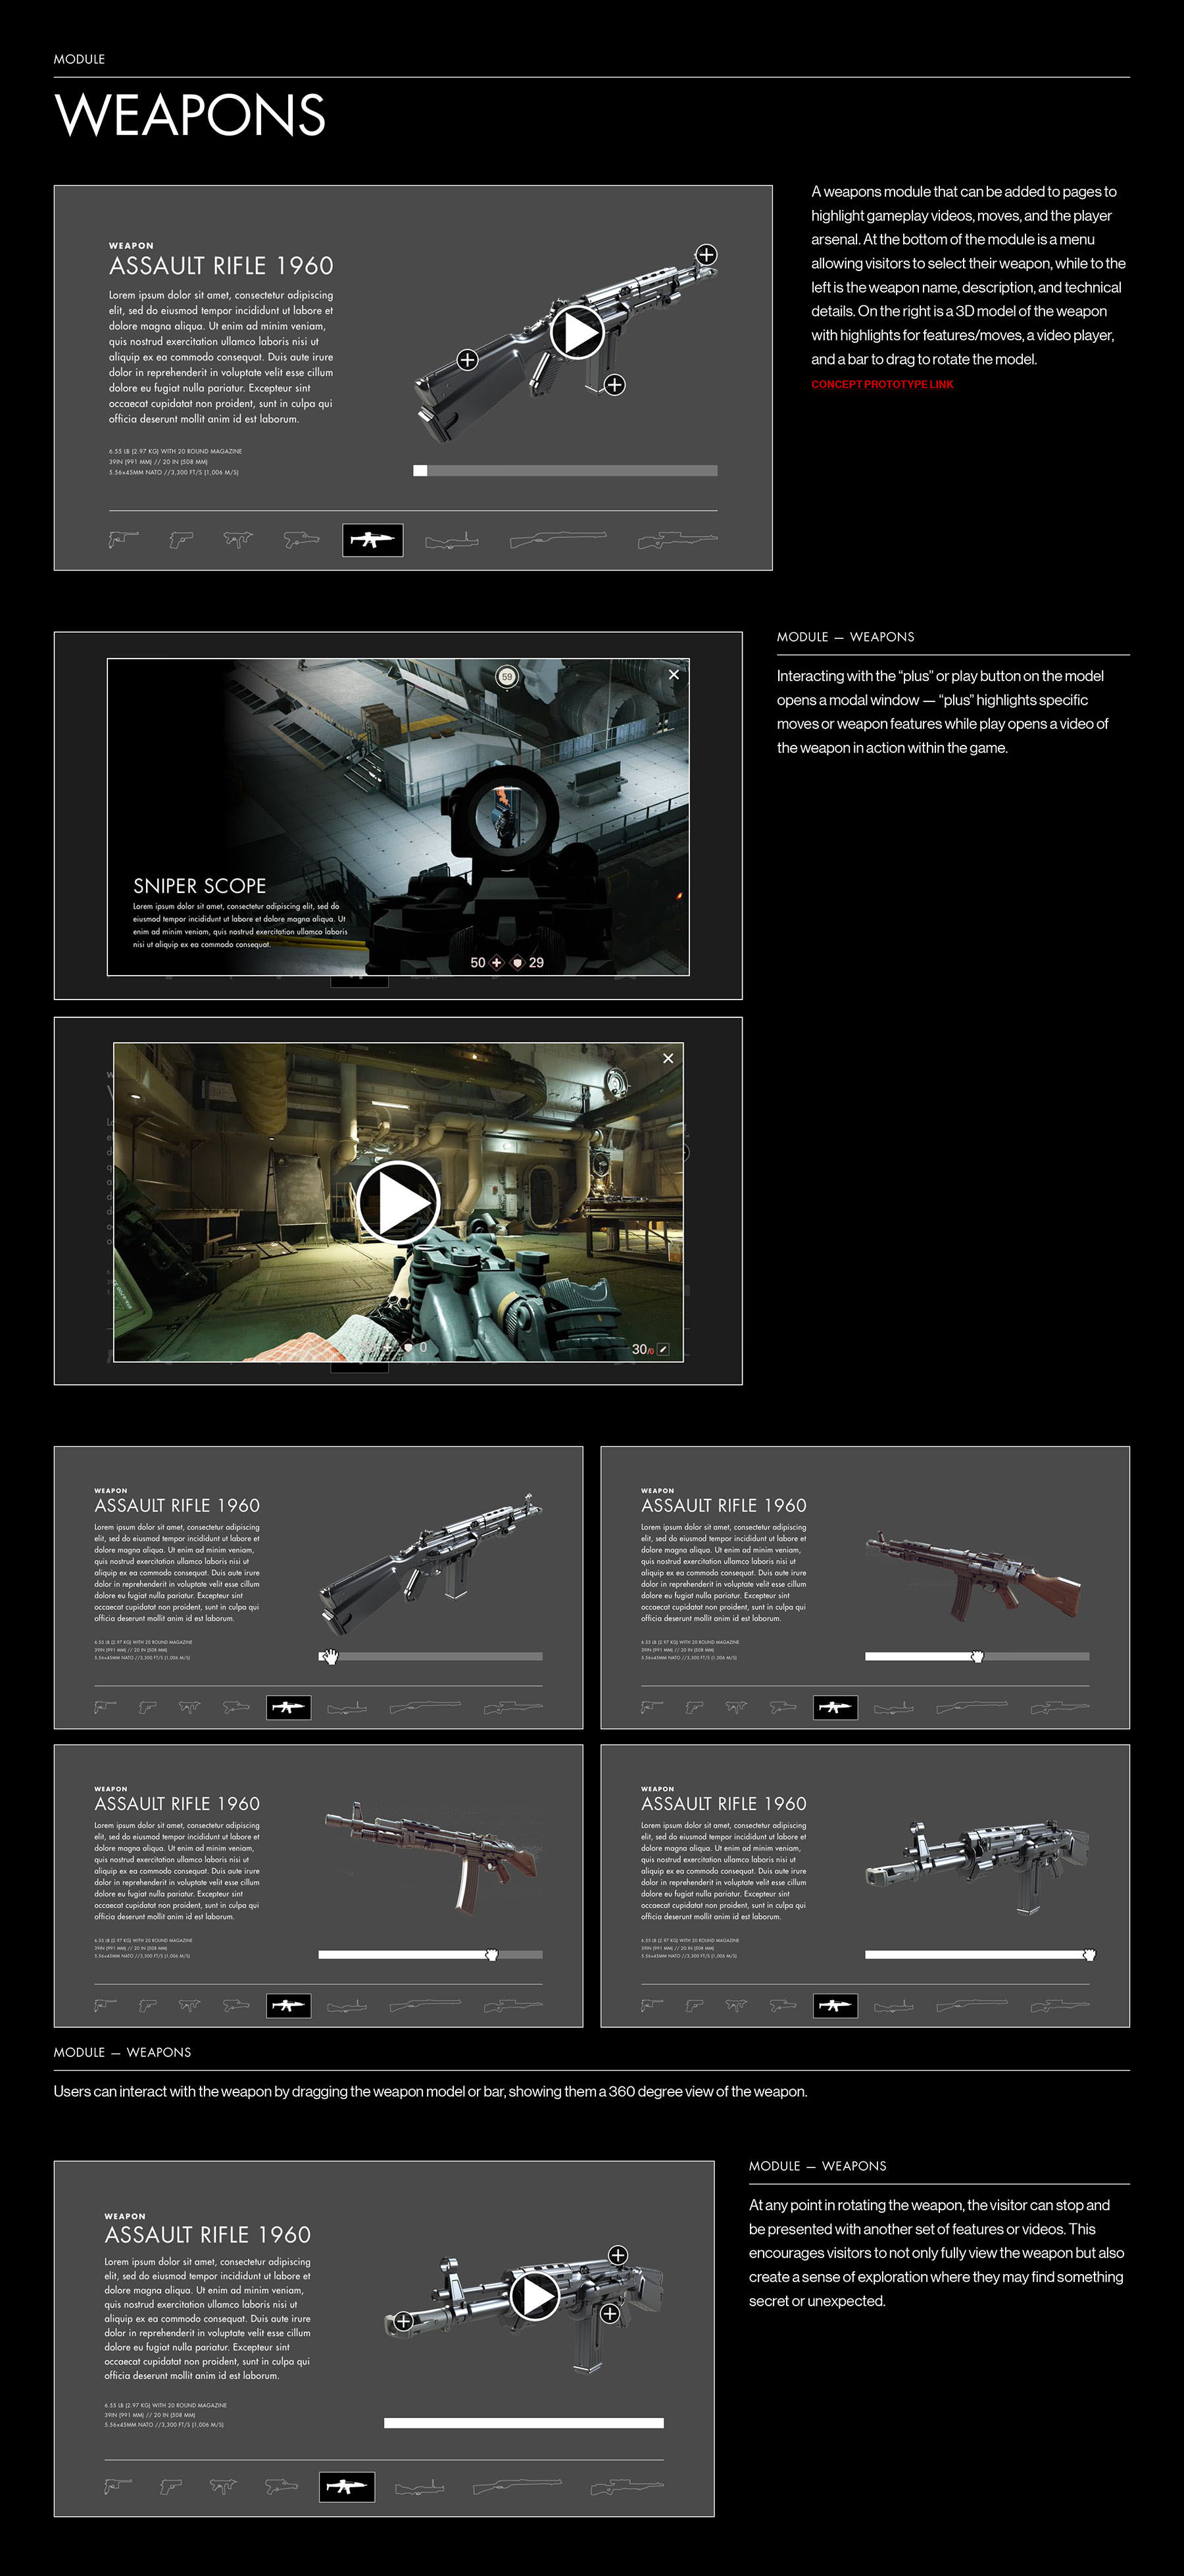 Initial weapons exploration module concept for the Wolfenstein II site